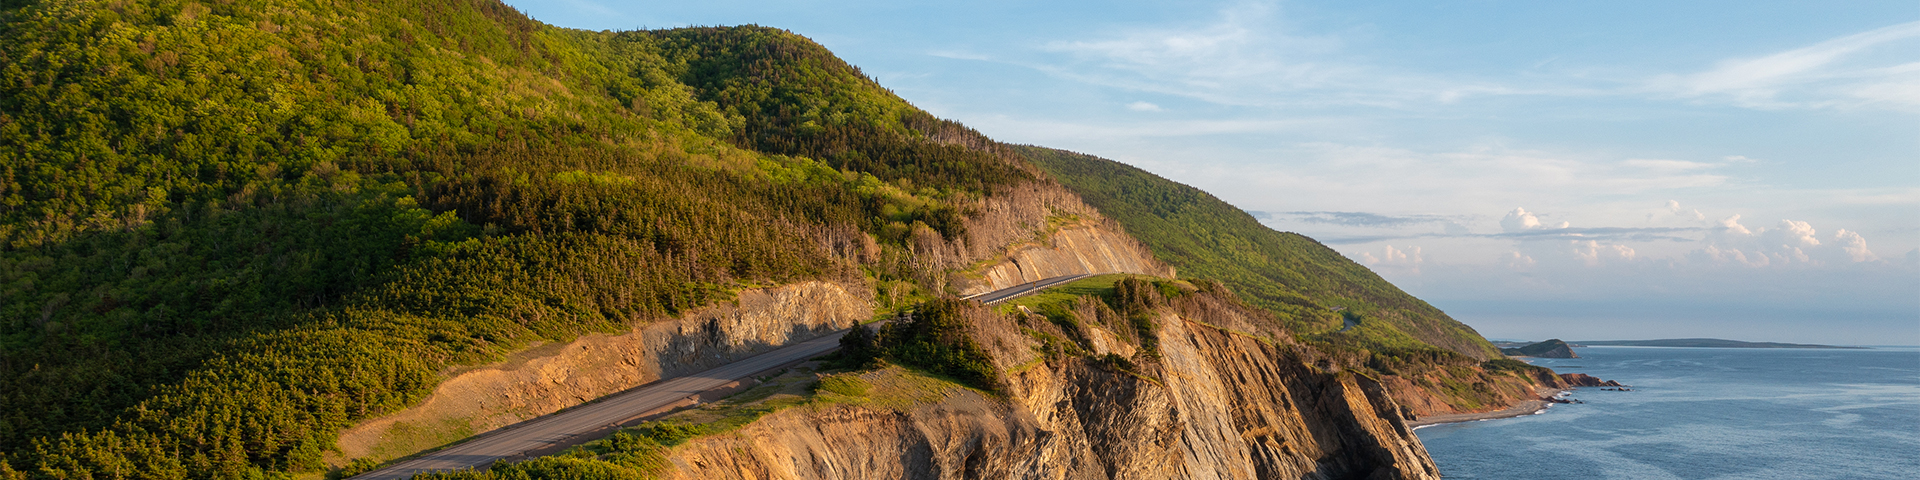 An aerial view of a cliff by the ocean with rolling green mountains in the background on the Cabot Trail.